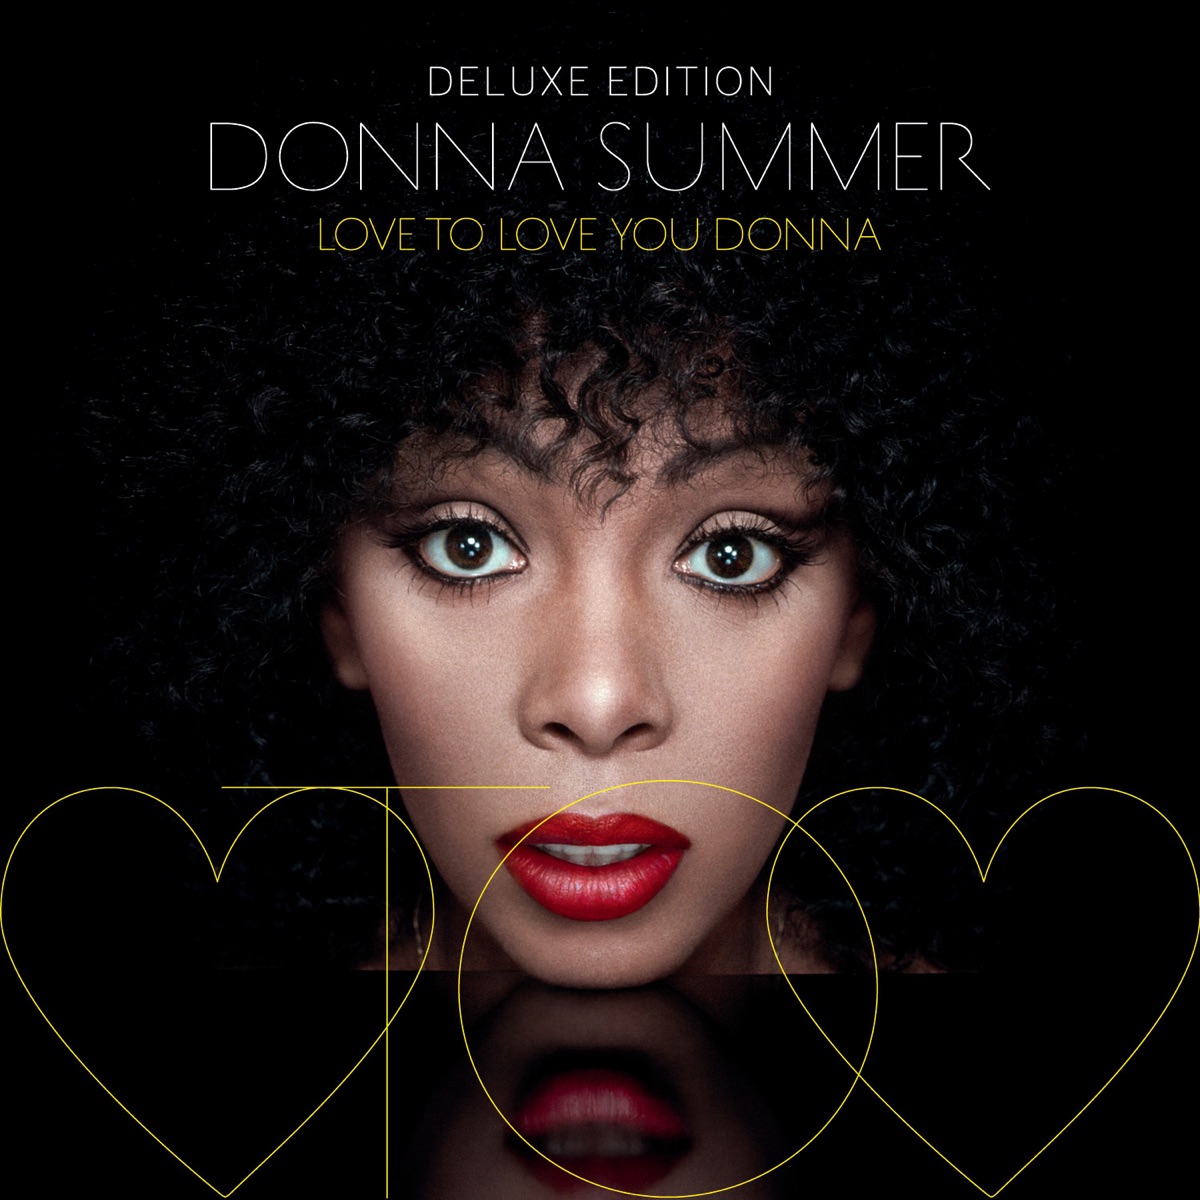 Donna Summer - Unconditional Love (Official Music Video) ft. Musical Youth  